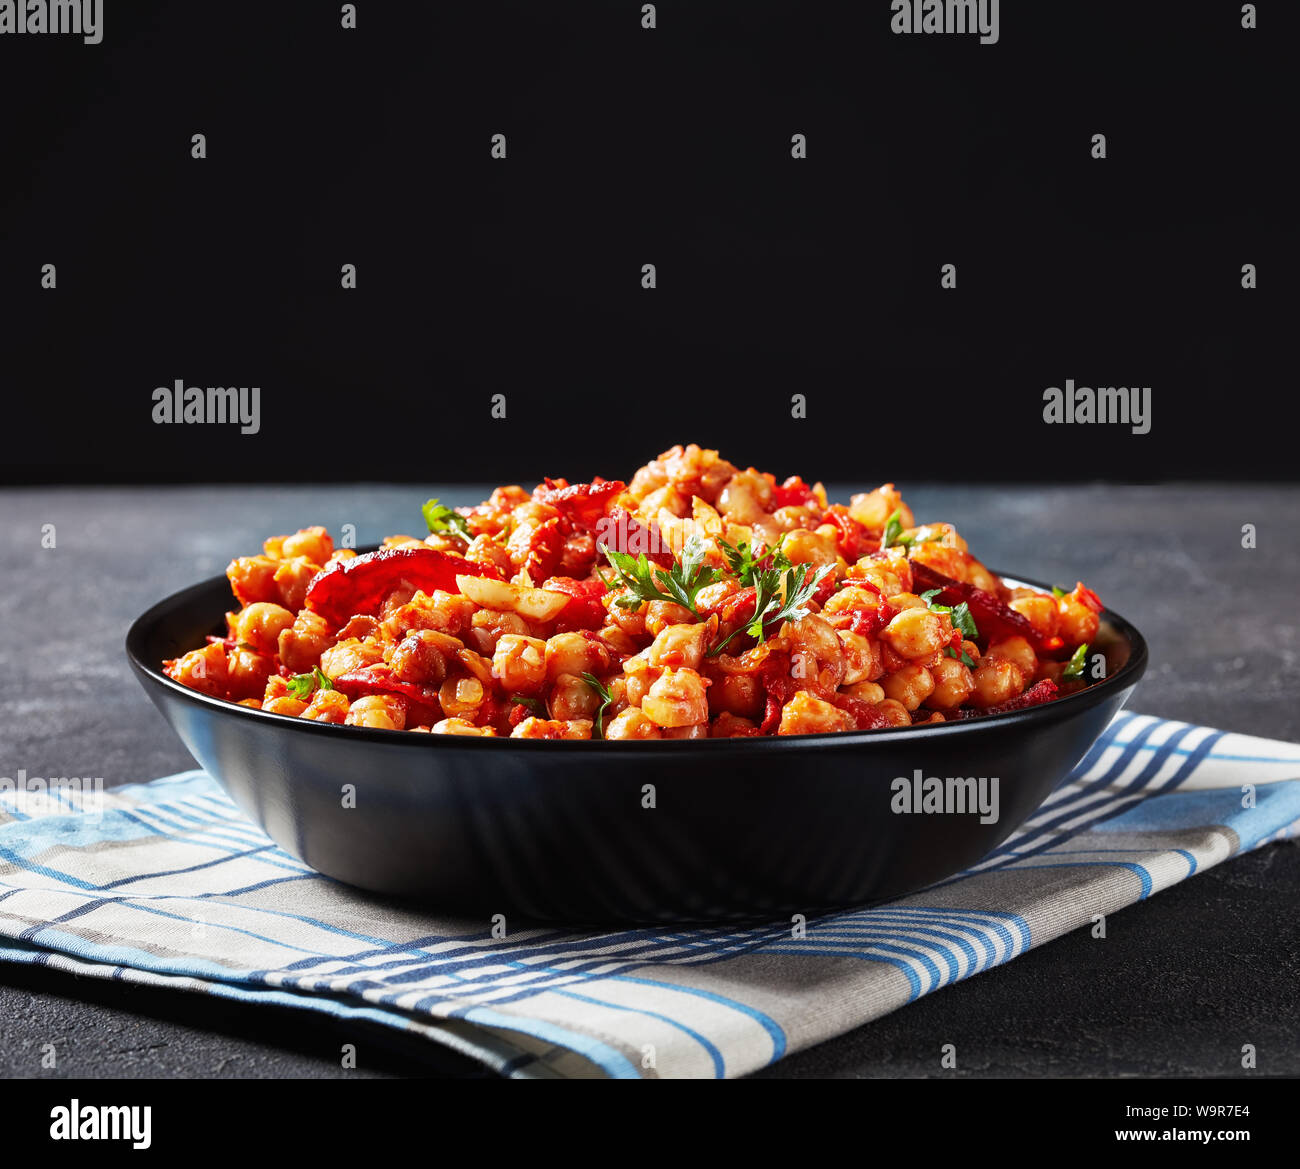 Garbanzos fritos, hot Chickpea stew with sliced chorizo, ham, tomatoes and spices in a black bowl on a concrete table with the black background behind Stock Photo